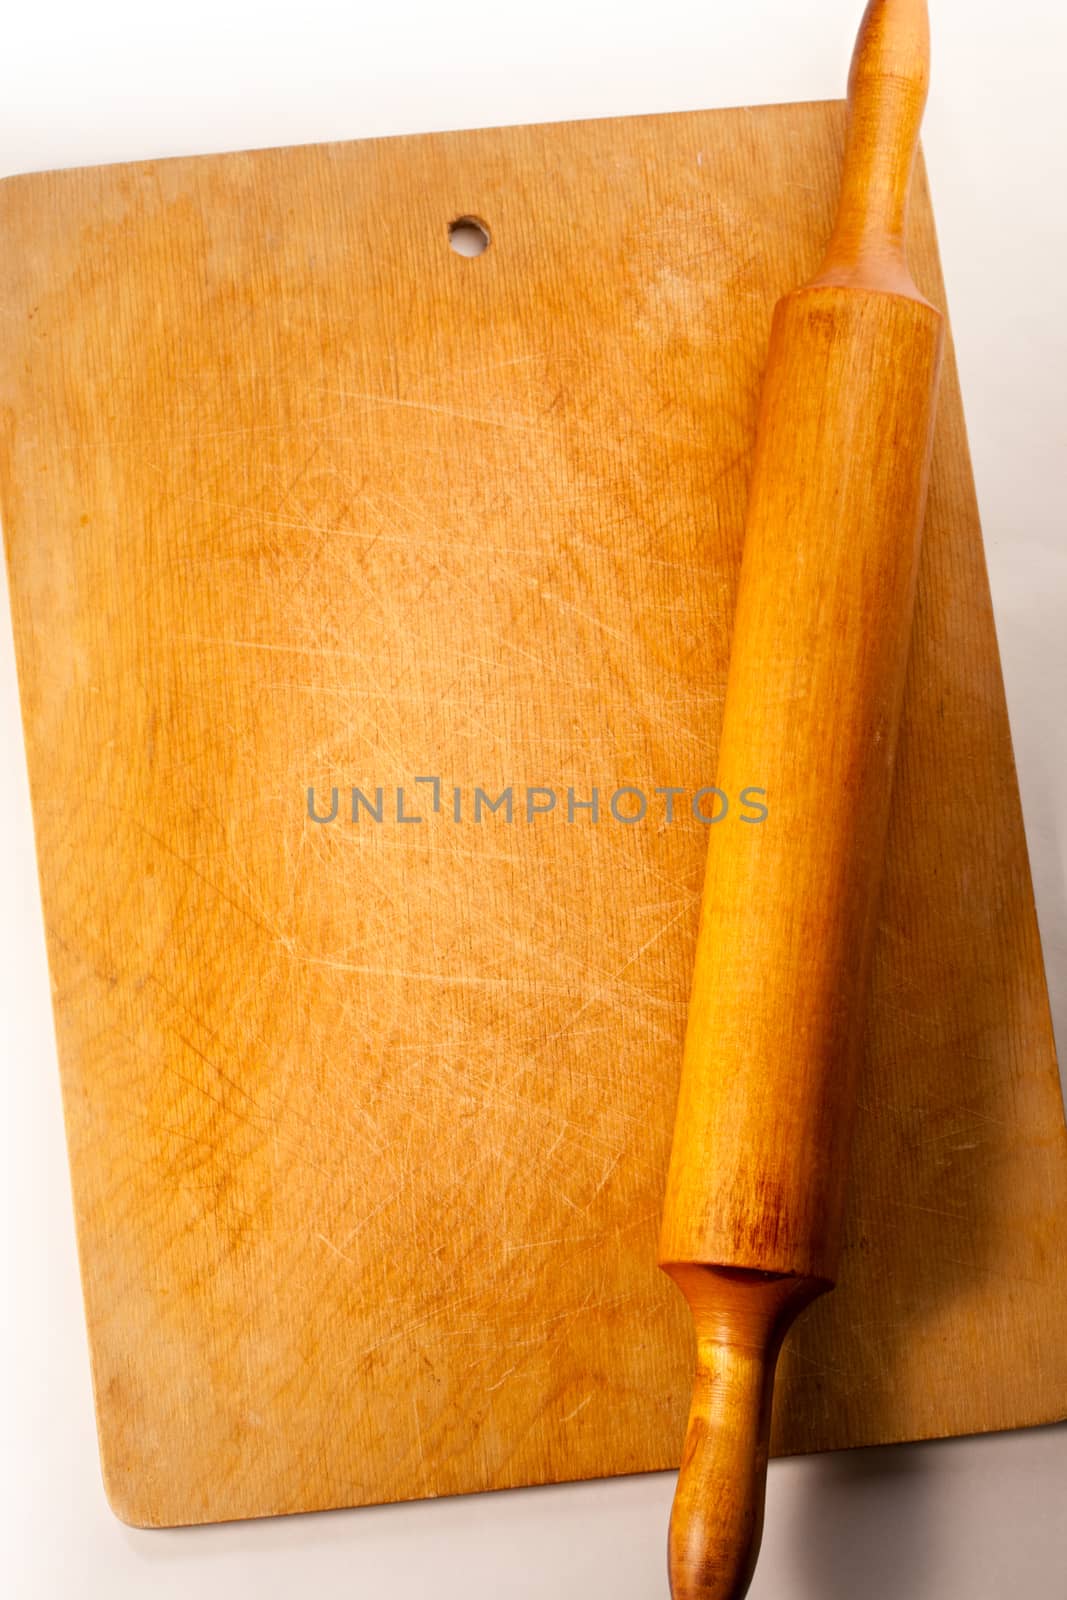 Rolling pin and wooden breadboard